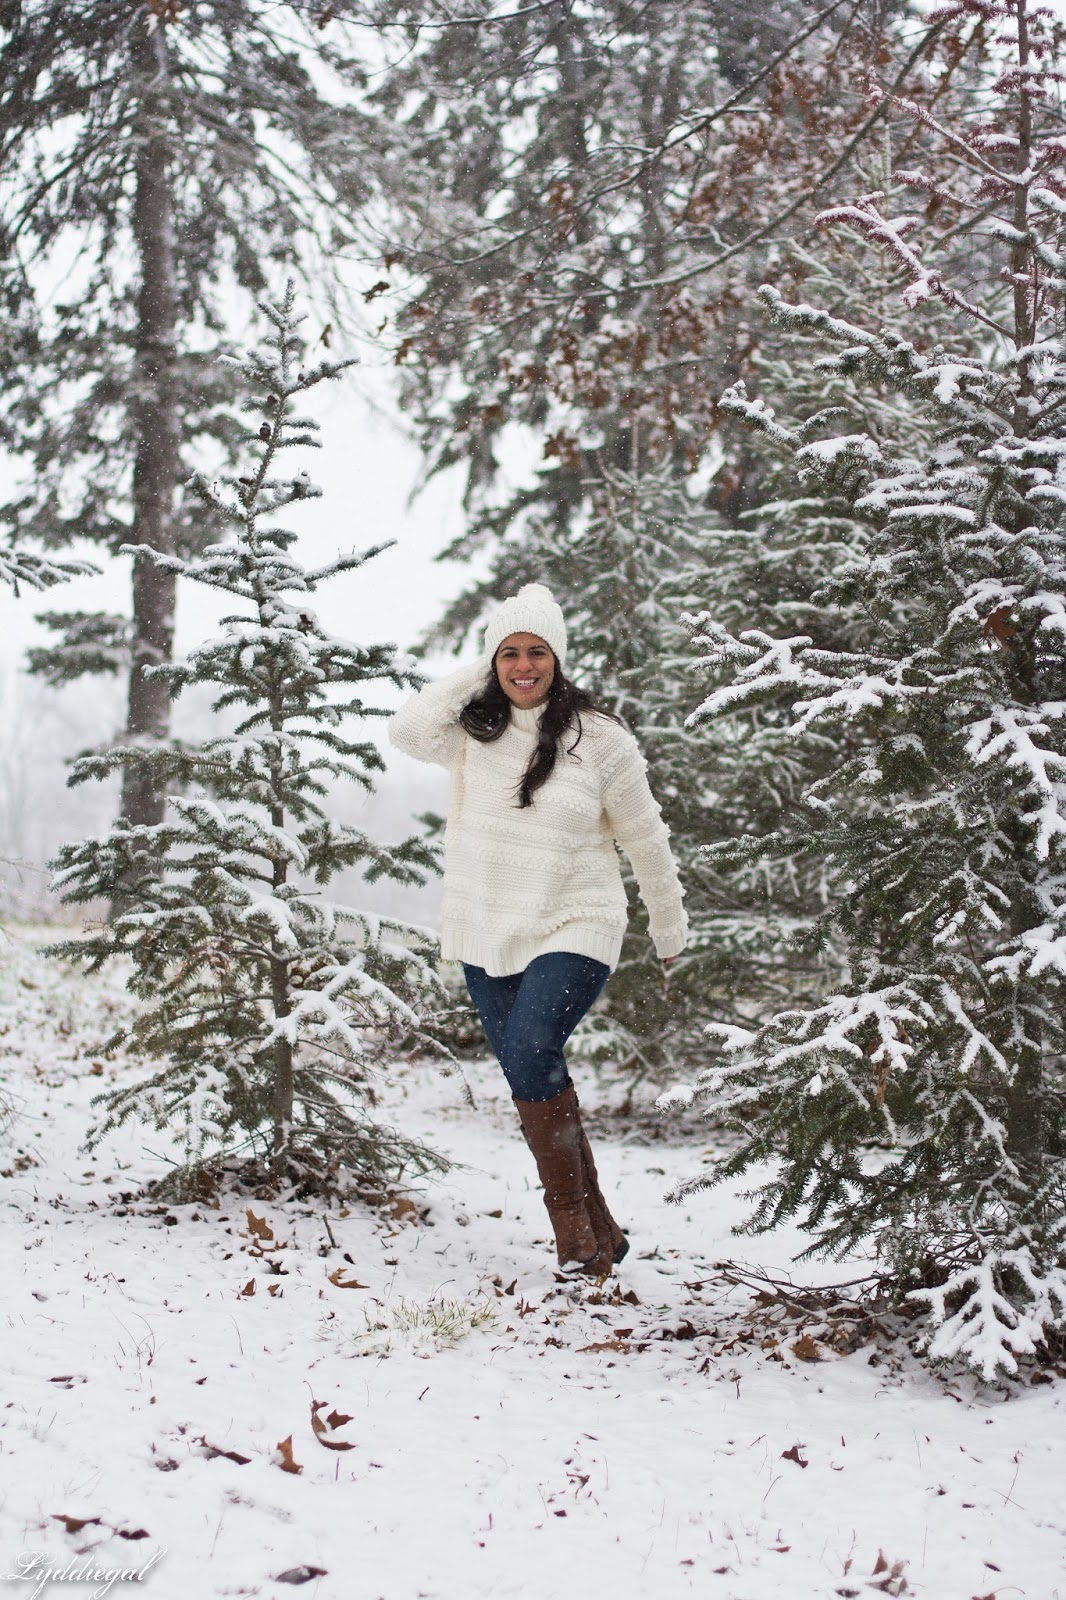 CT Fashion blogger wearing a white sweater, pom pom hat and brown boots in the snow